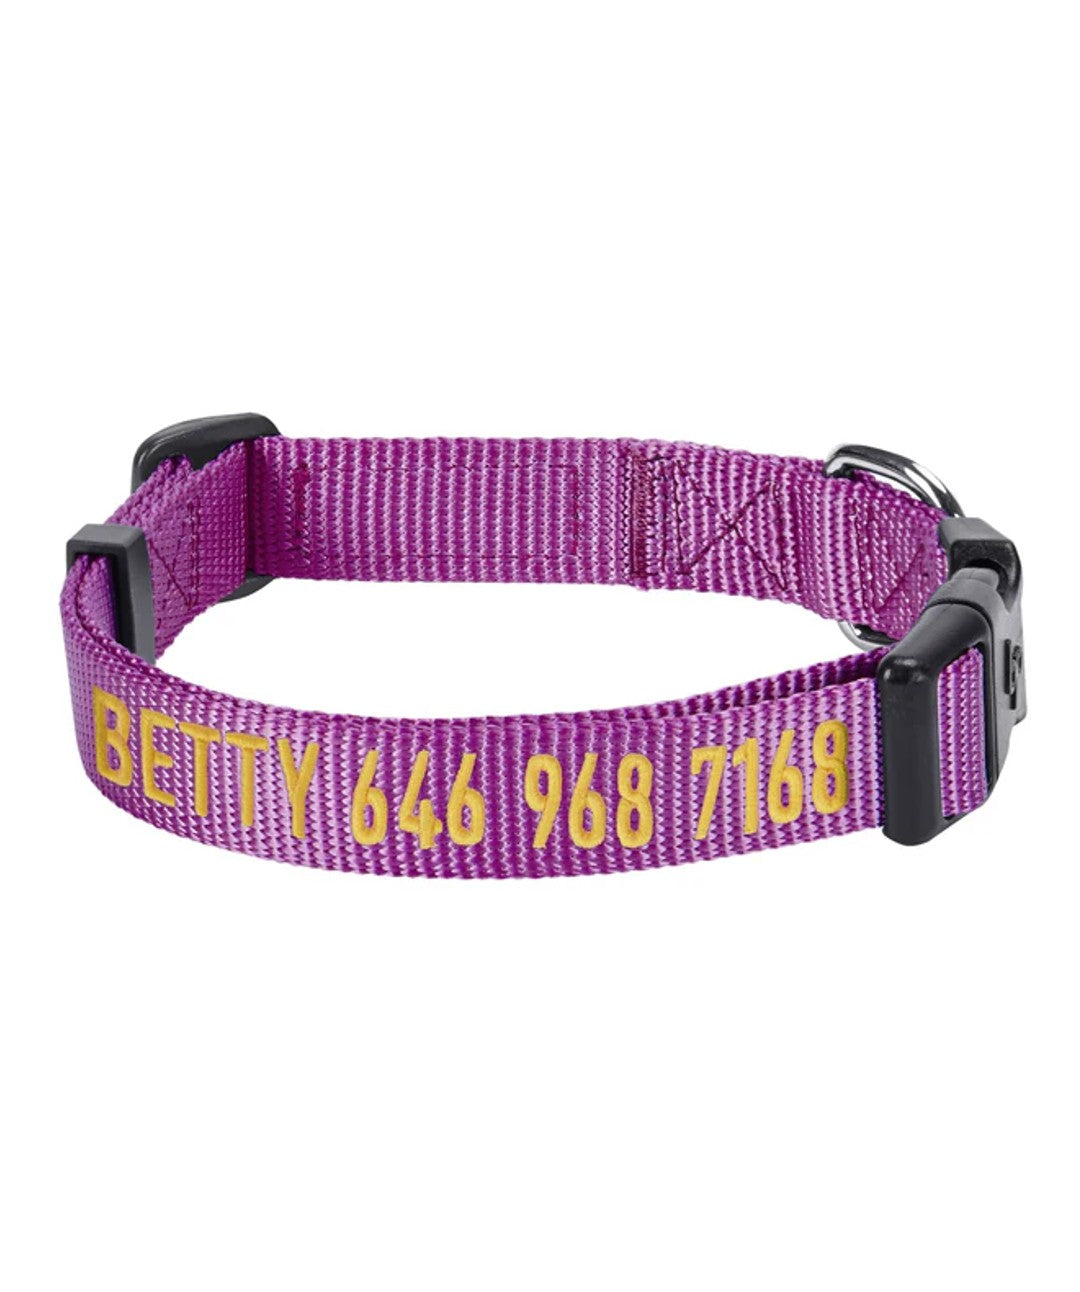 Blueberry Pet Personalized Classic Dog Collar Collar Blueberry Pet Violet S 